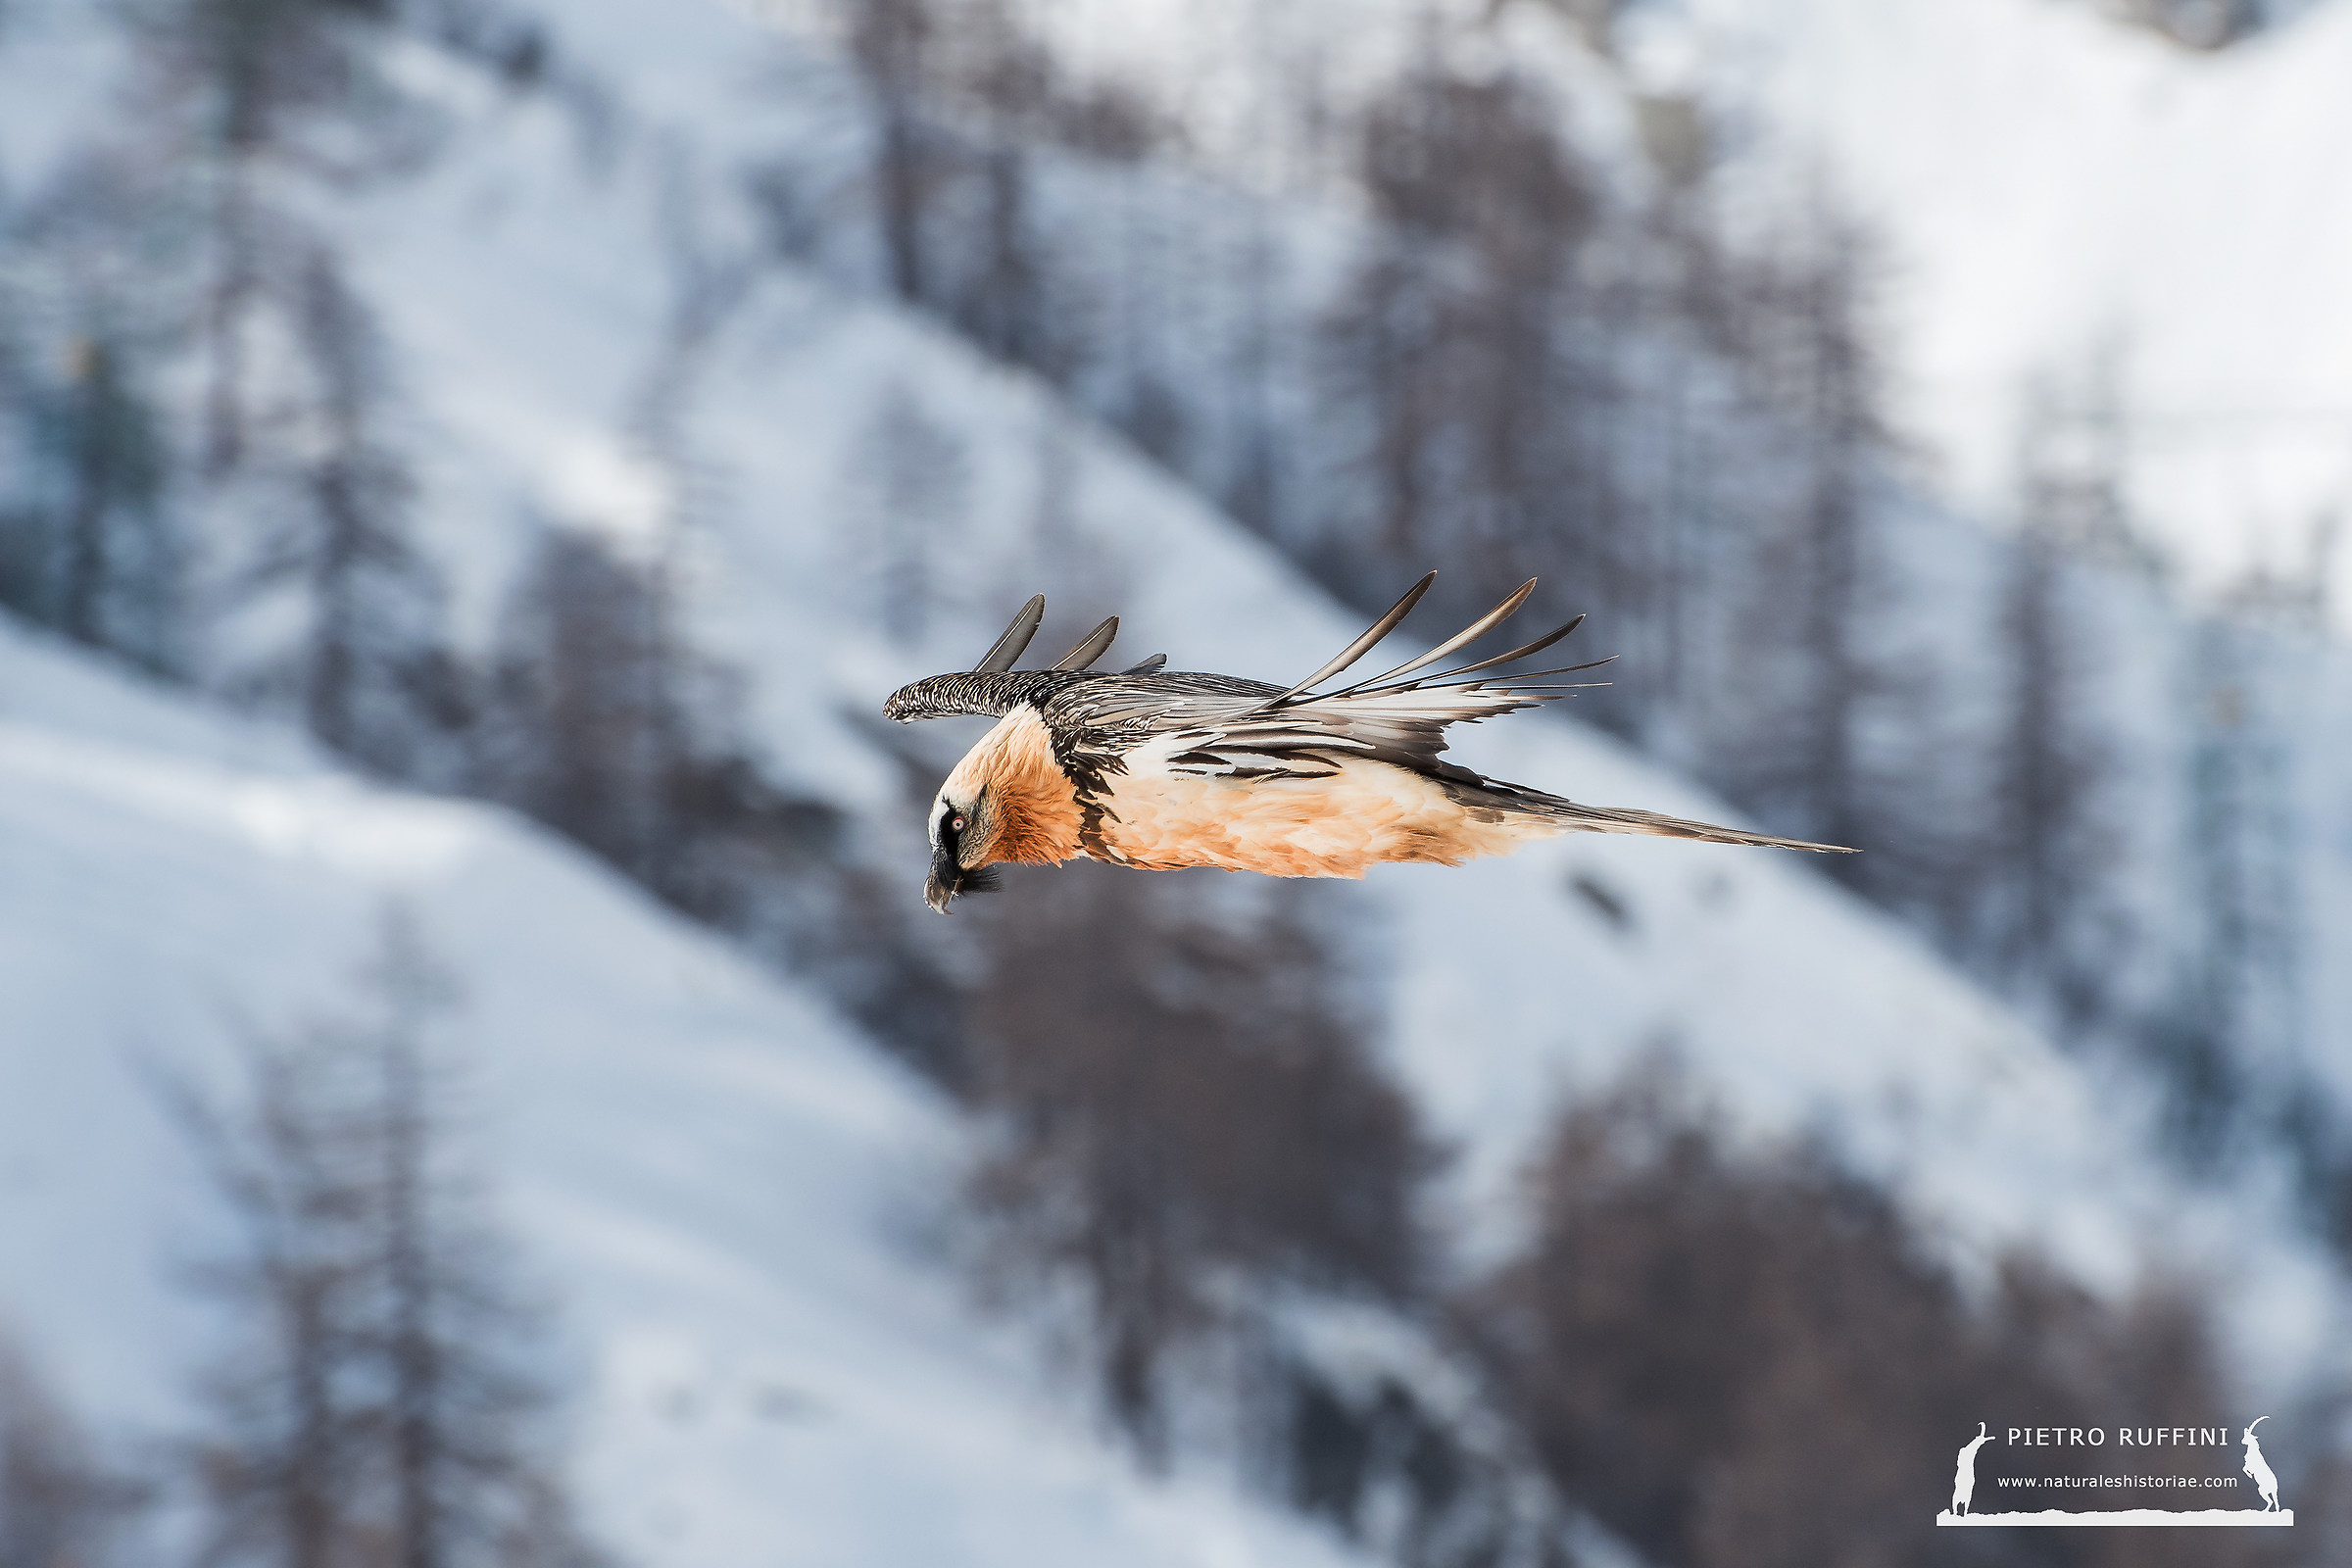 Finally the bearded vulture!...